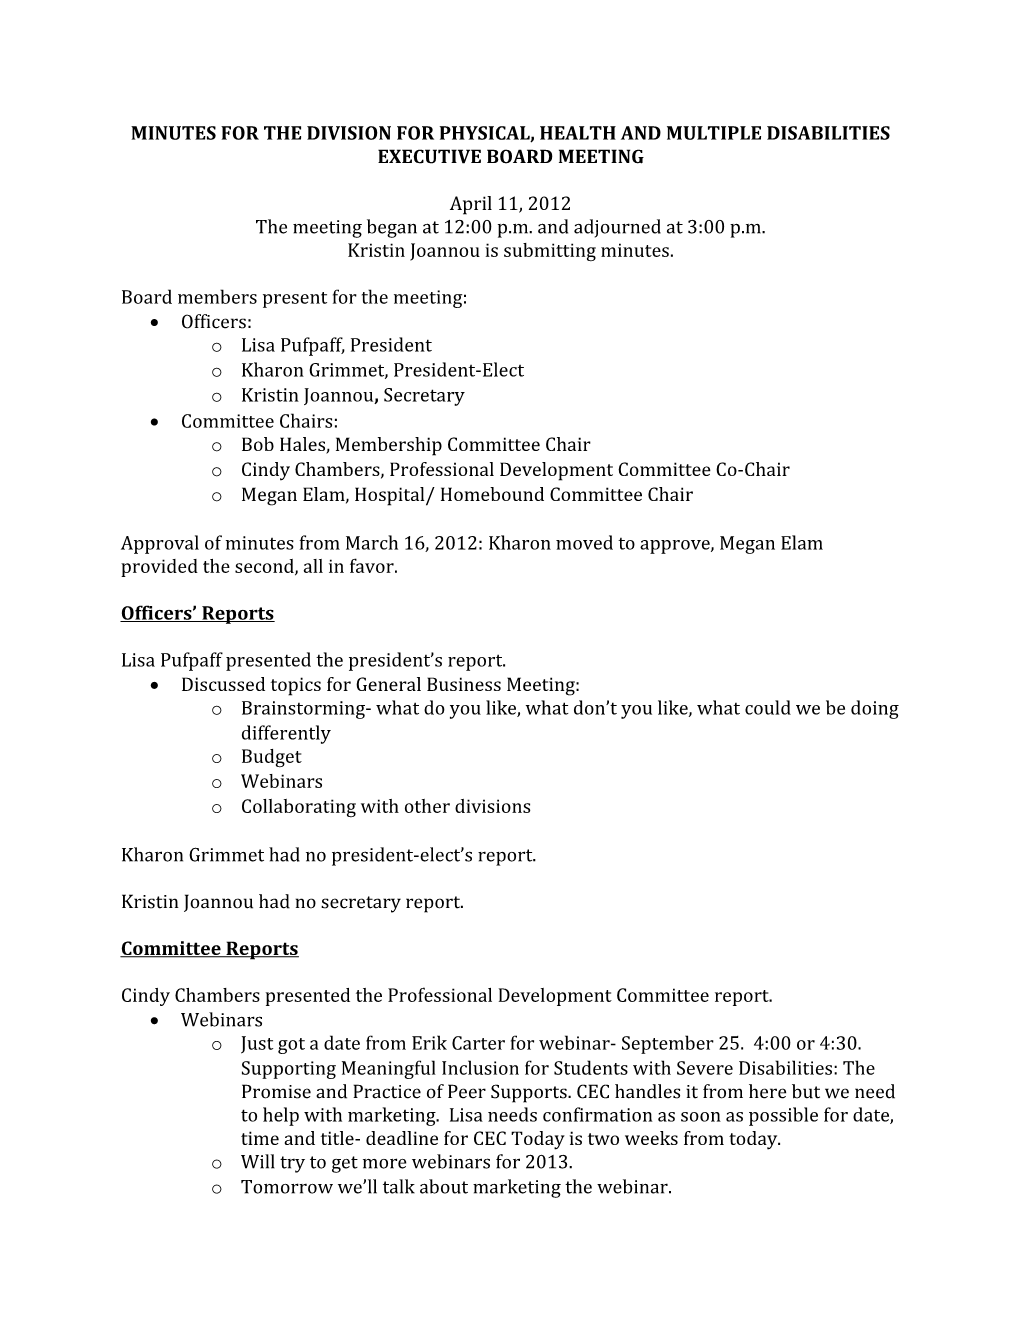 Minutes for the Division for Physical, Health and Multiple Disabilities Executive Board